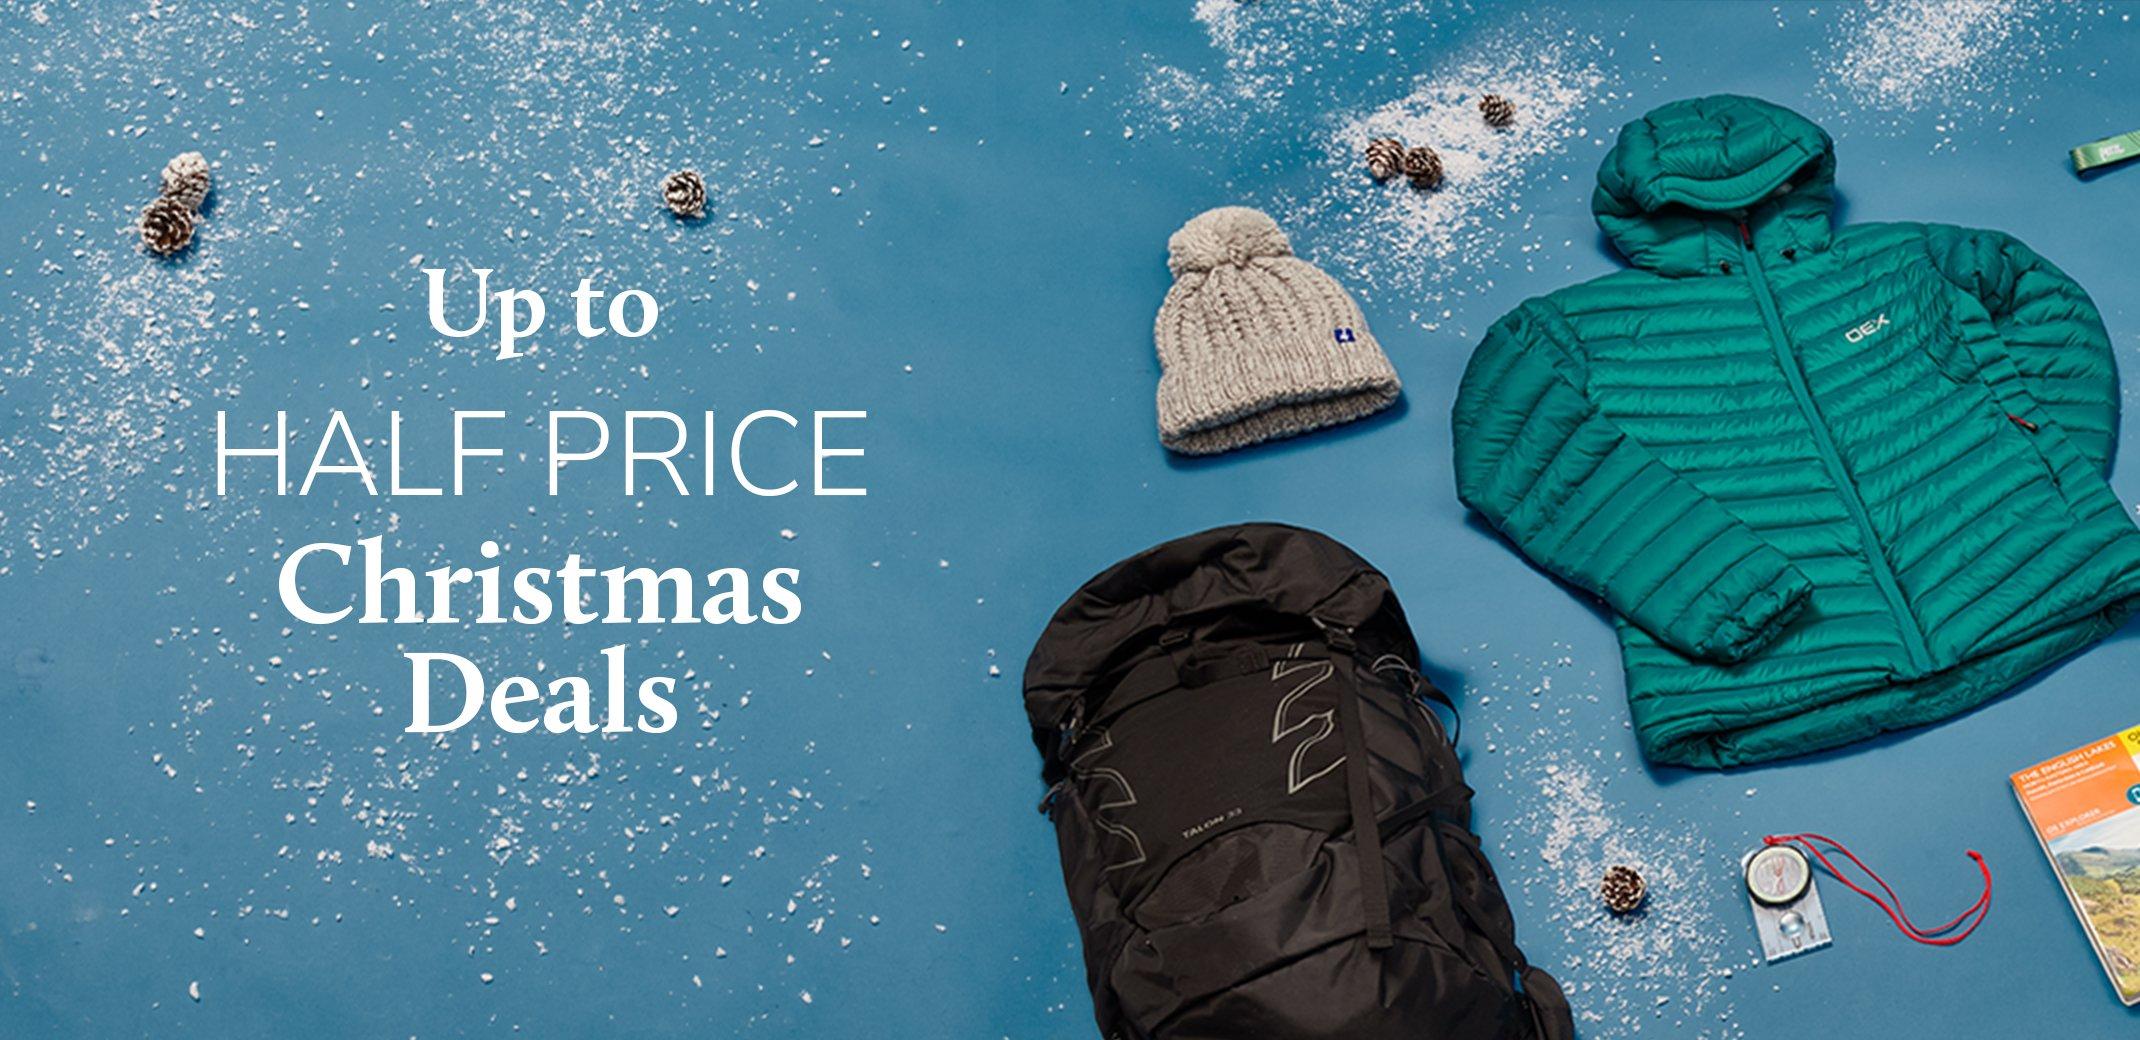 Up to Half Price Christmas Deals